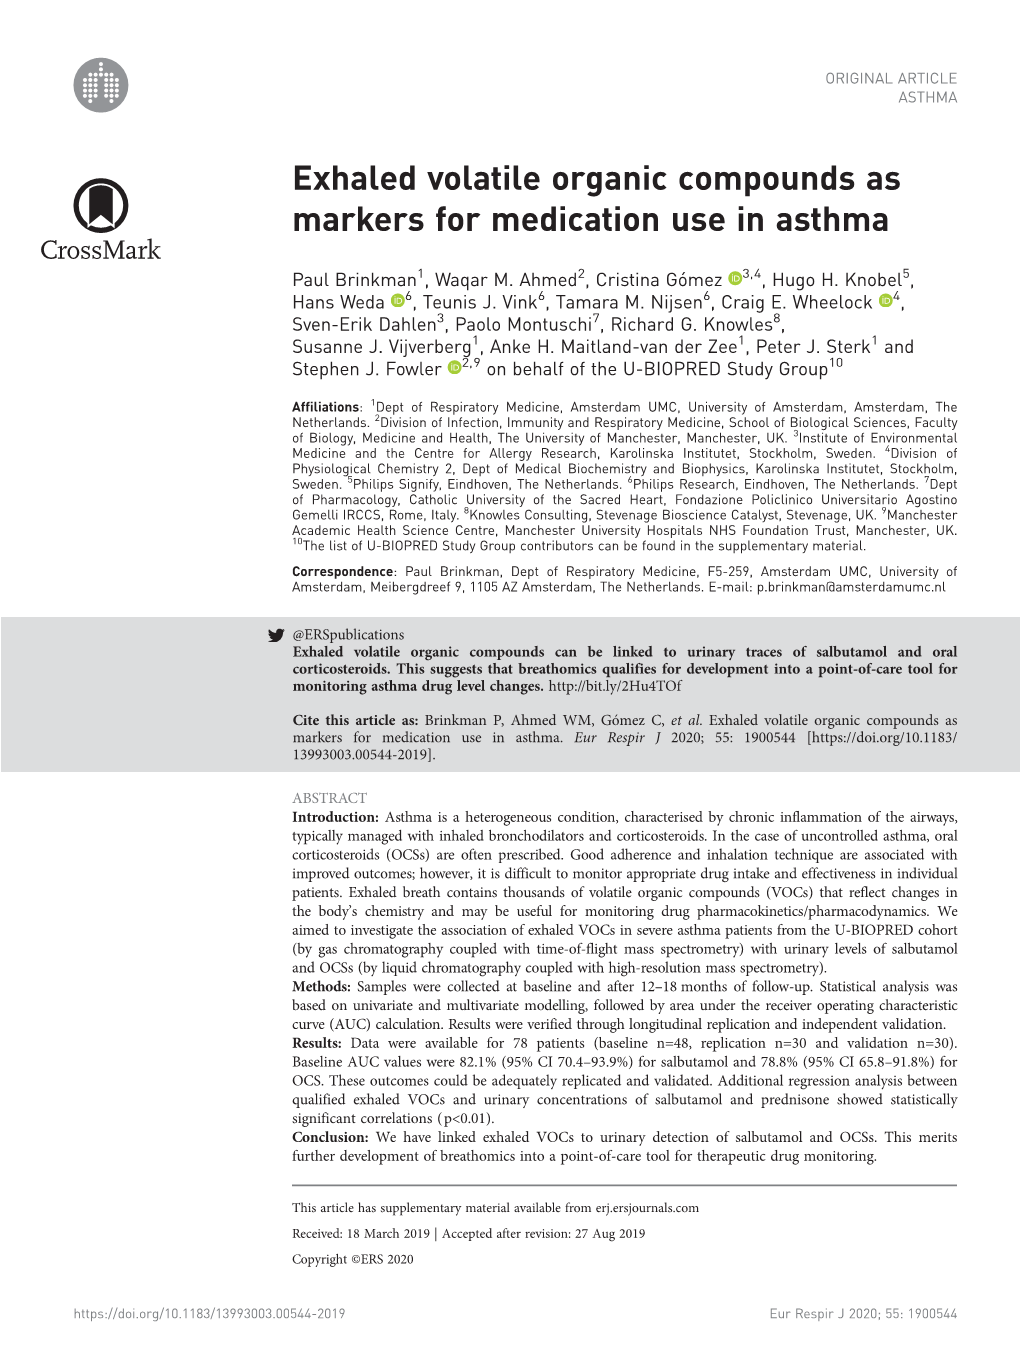 Exhaled Volatile Organic Compounds As Markers for Medication Use in Asthma